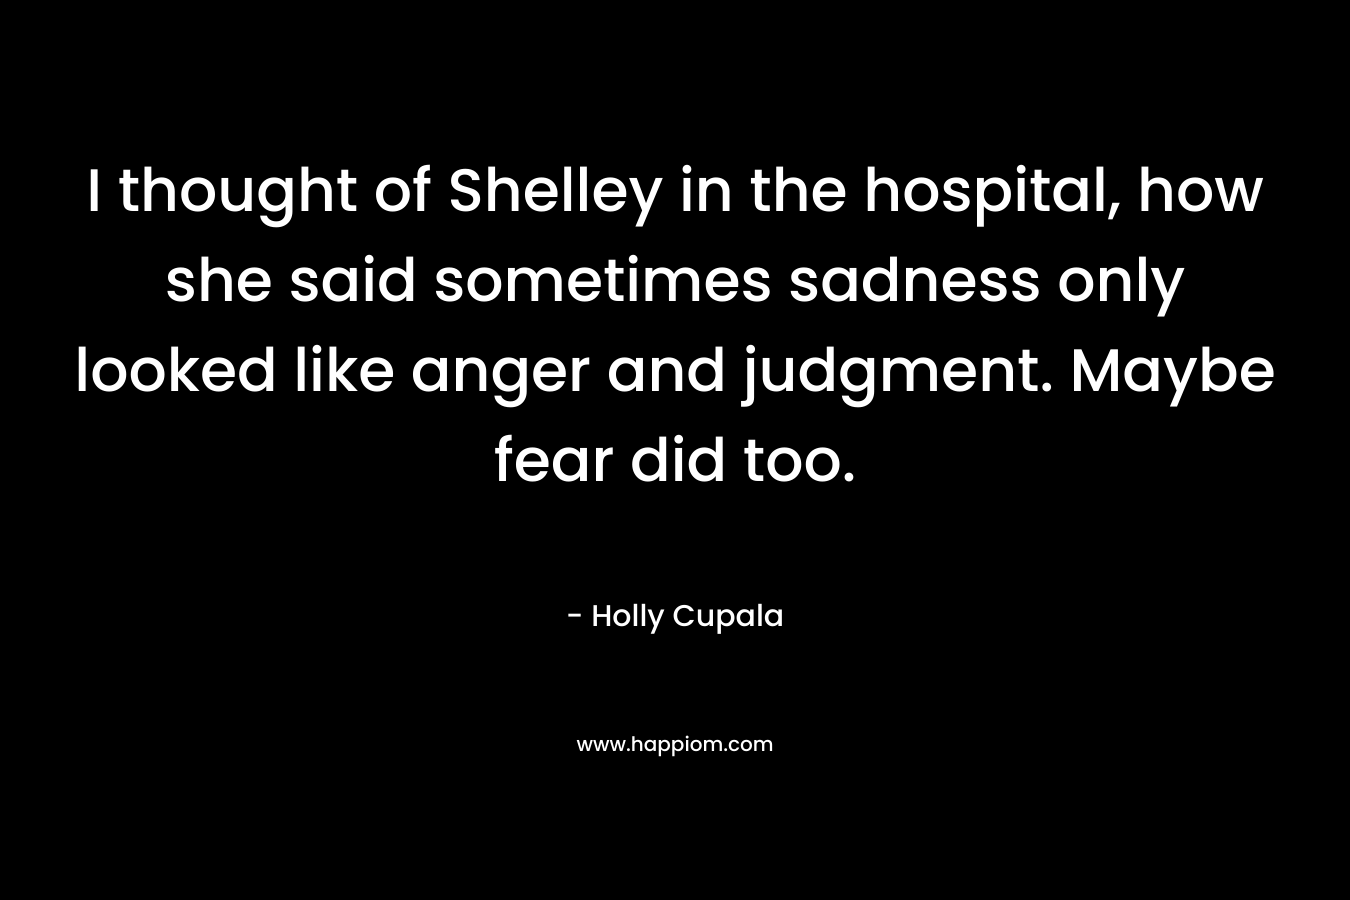 I thought of Shelley in the hospital, how she said sometimes sadness only looked like anger and judgment. Maybe fear did too. – Holly Cupala